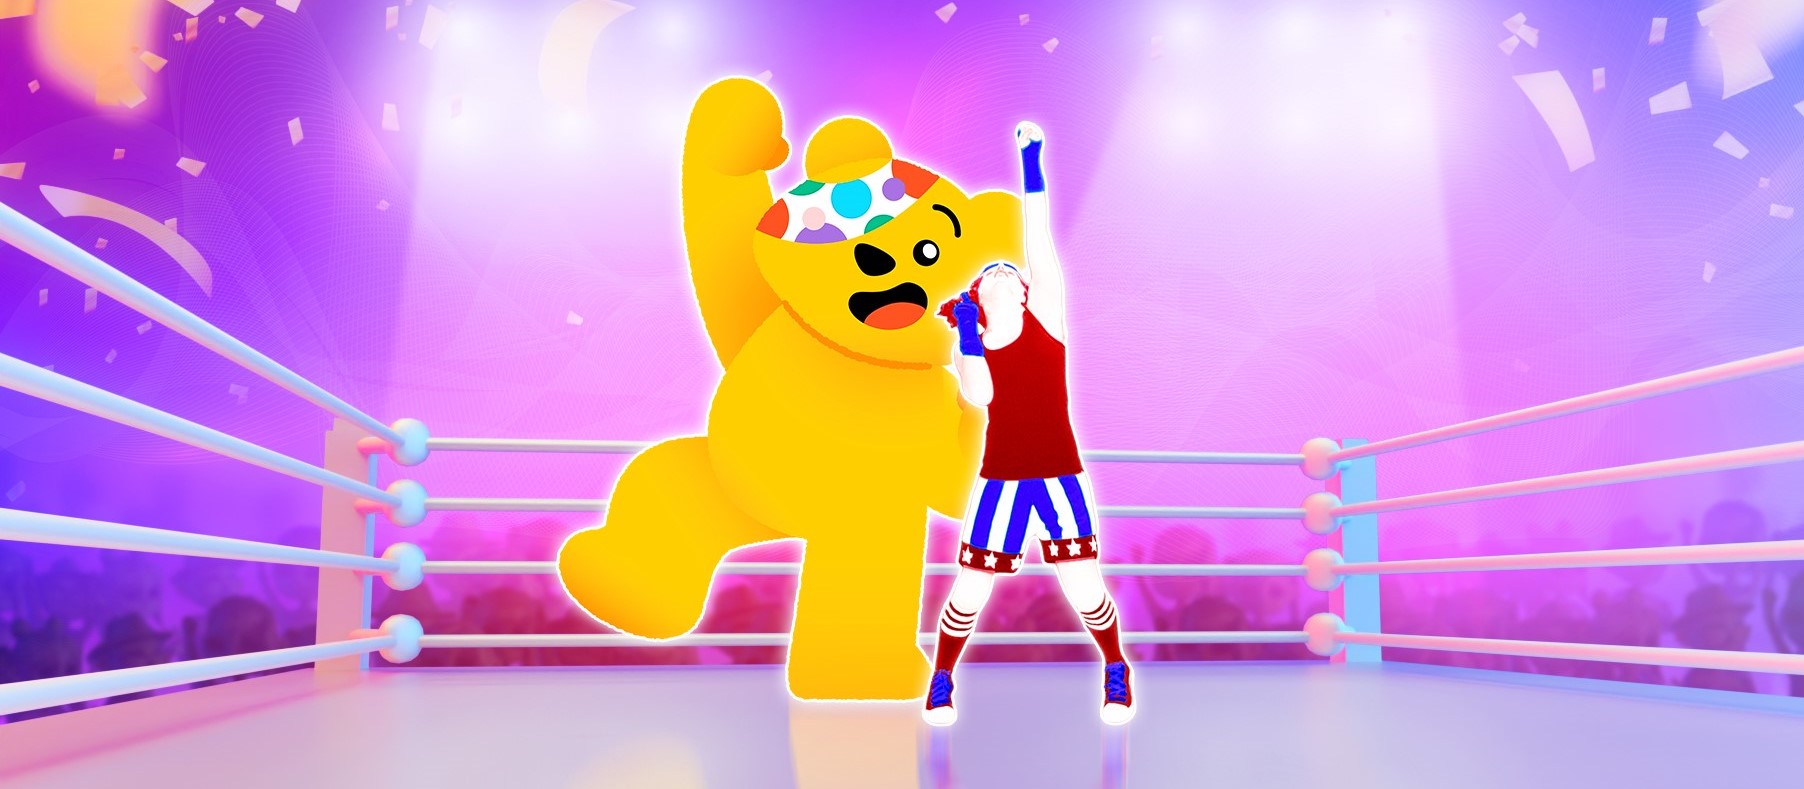 Pudsey and a Just Dance character pose on a pink background